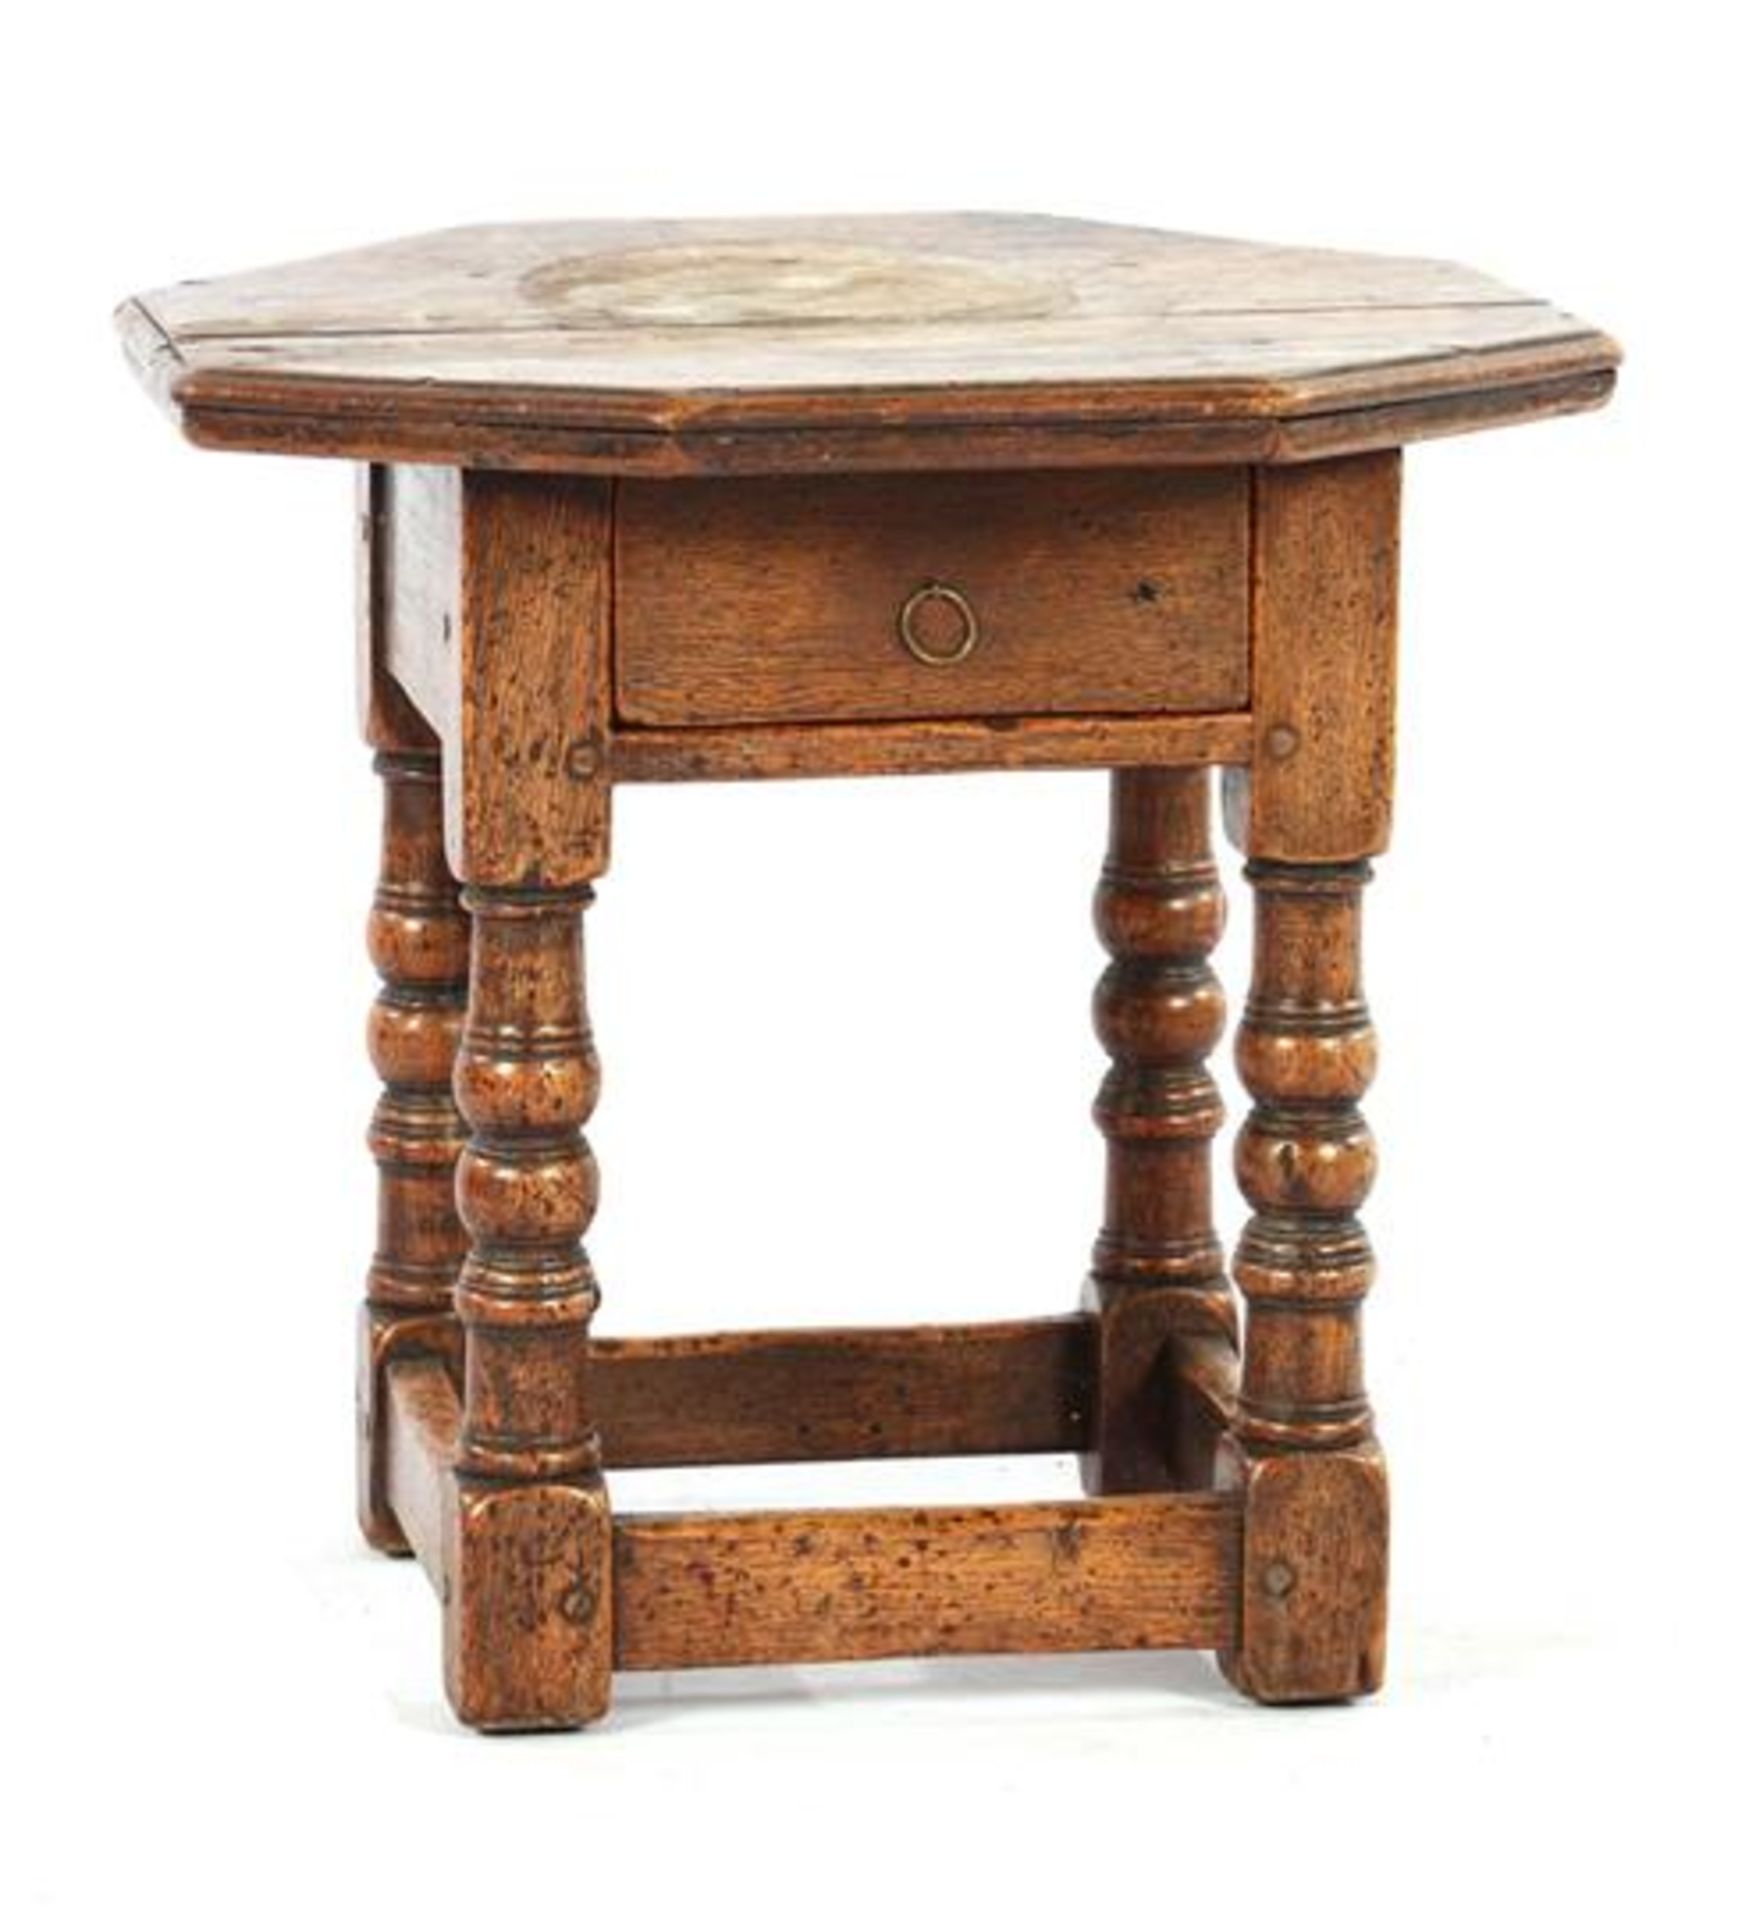 Octagonal oak table with drawer, Holland approx. 1650, 46 cm high, 50x50 cm (top needs to be